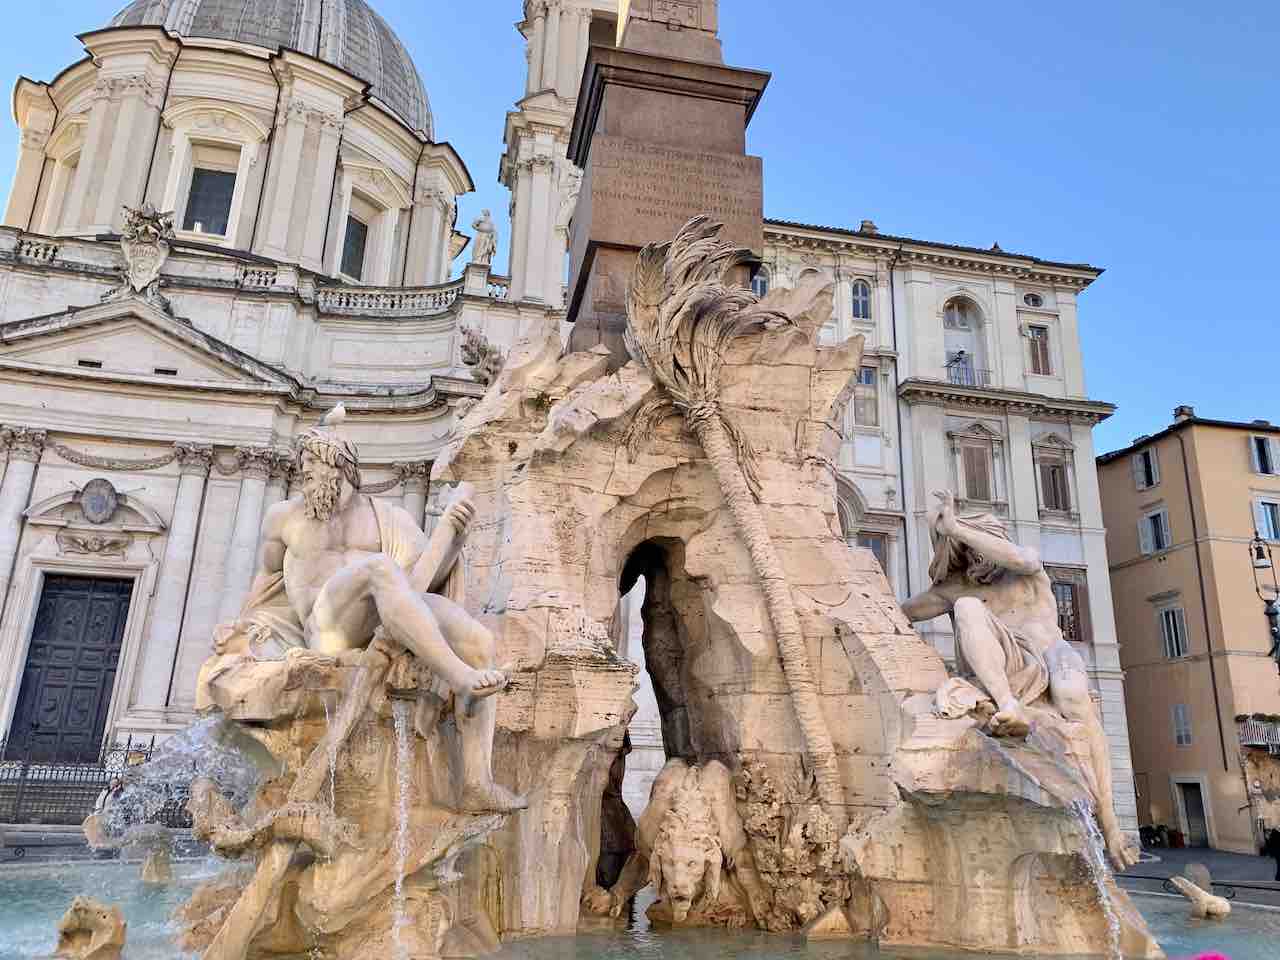 Fountain of the Four Rivers of Piazza Navona